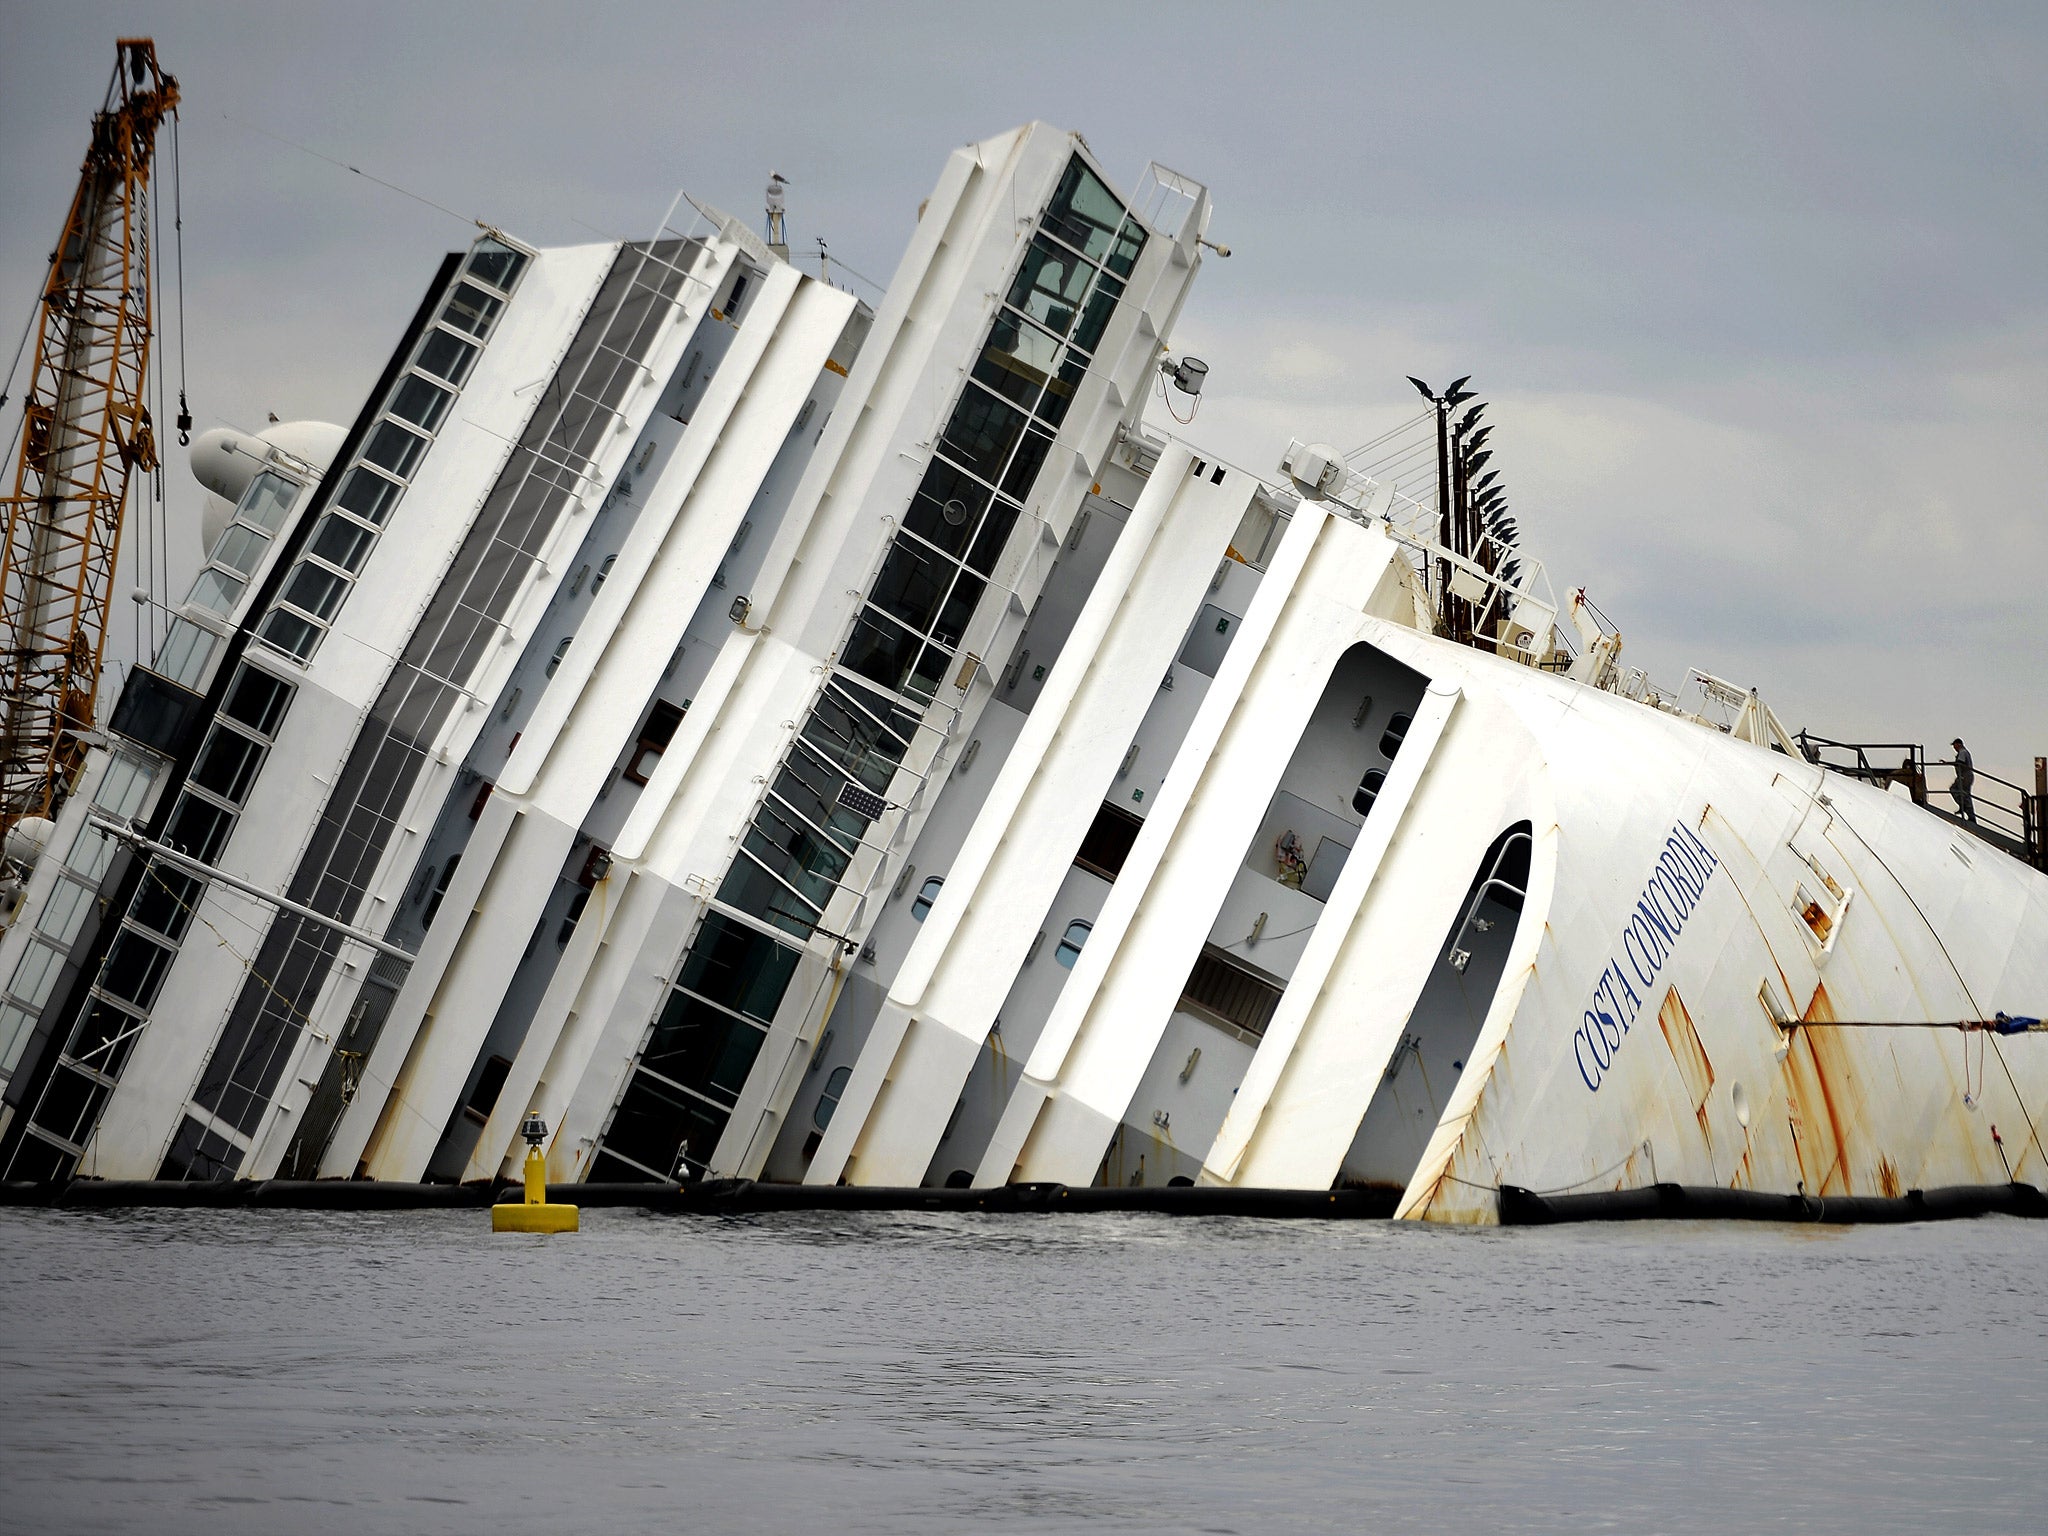 The Costa Concordia will be cut into pieces and sold for scrap